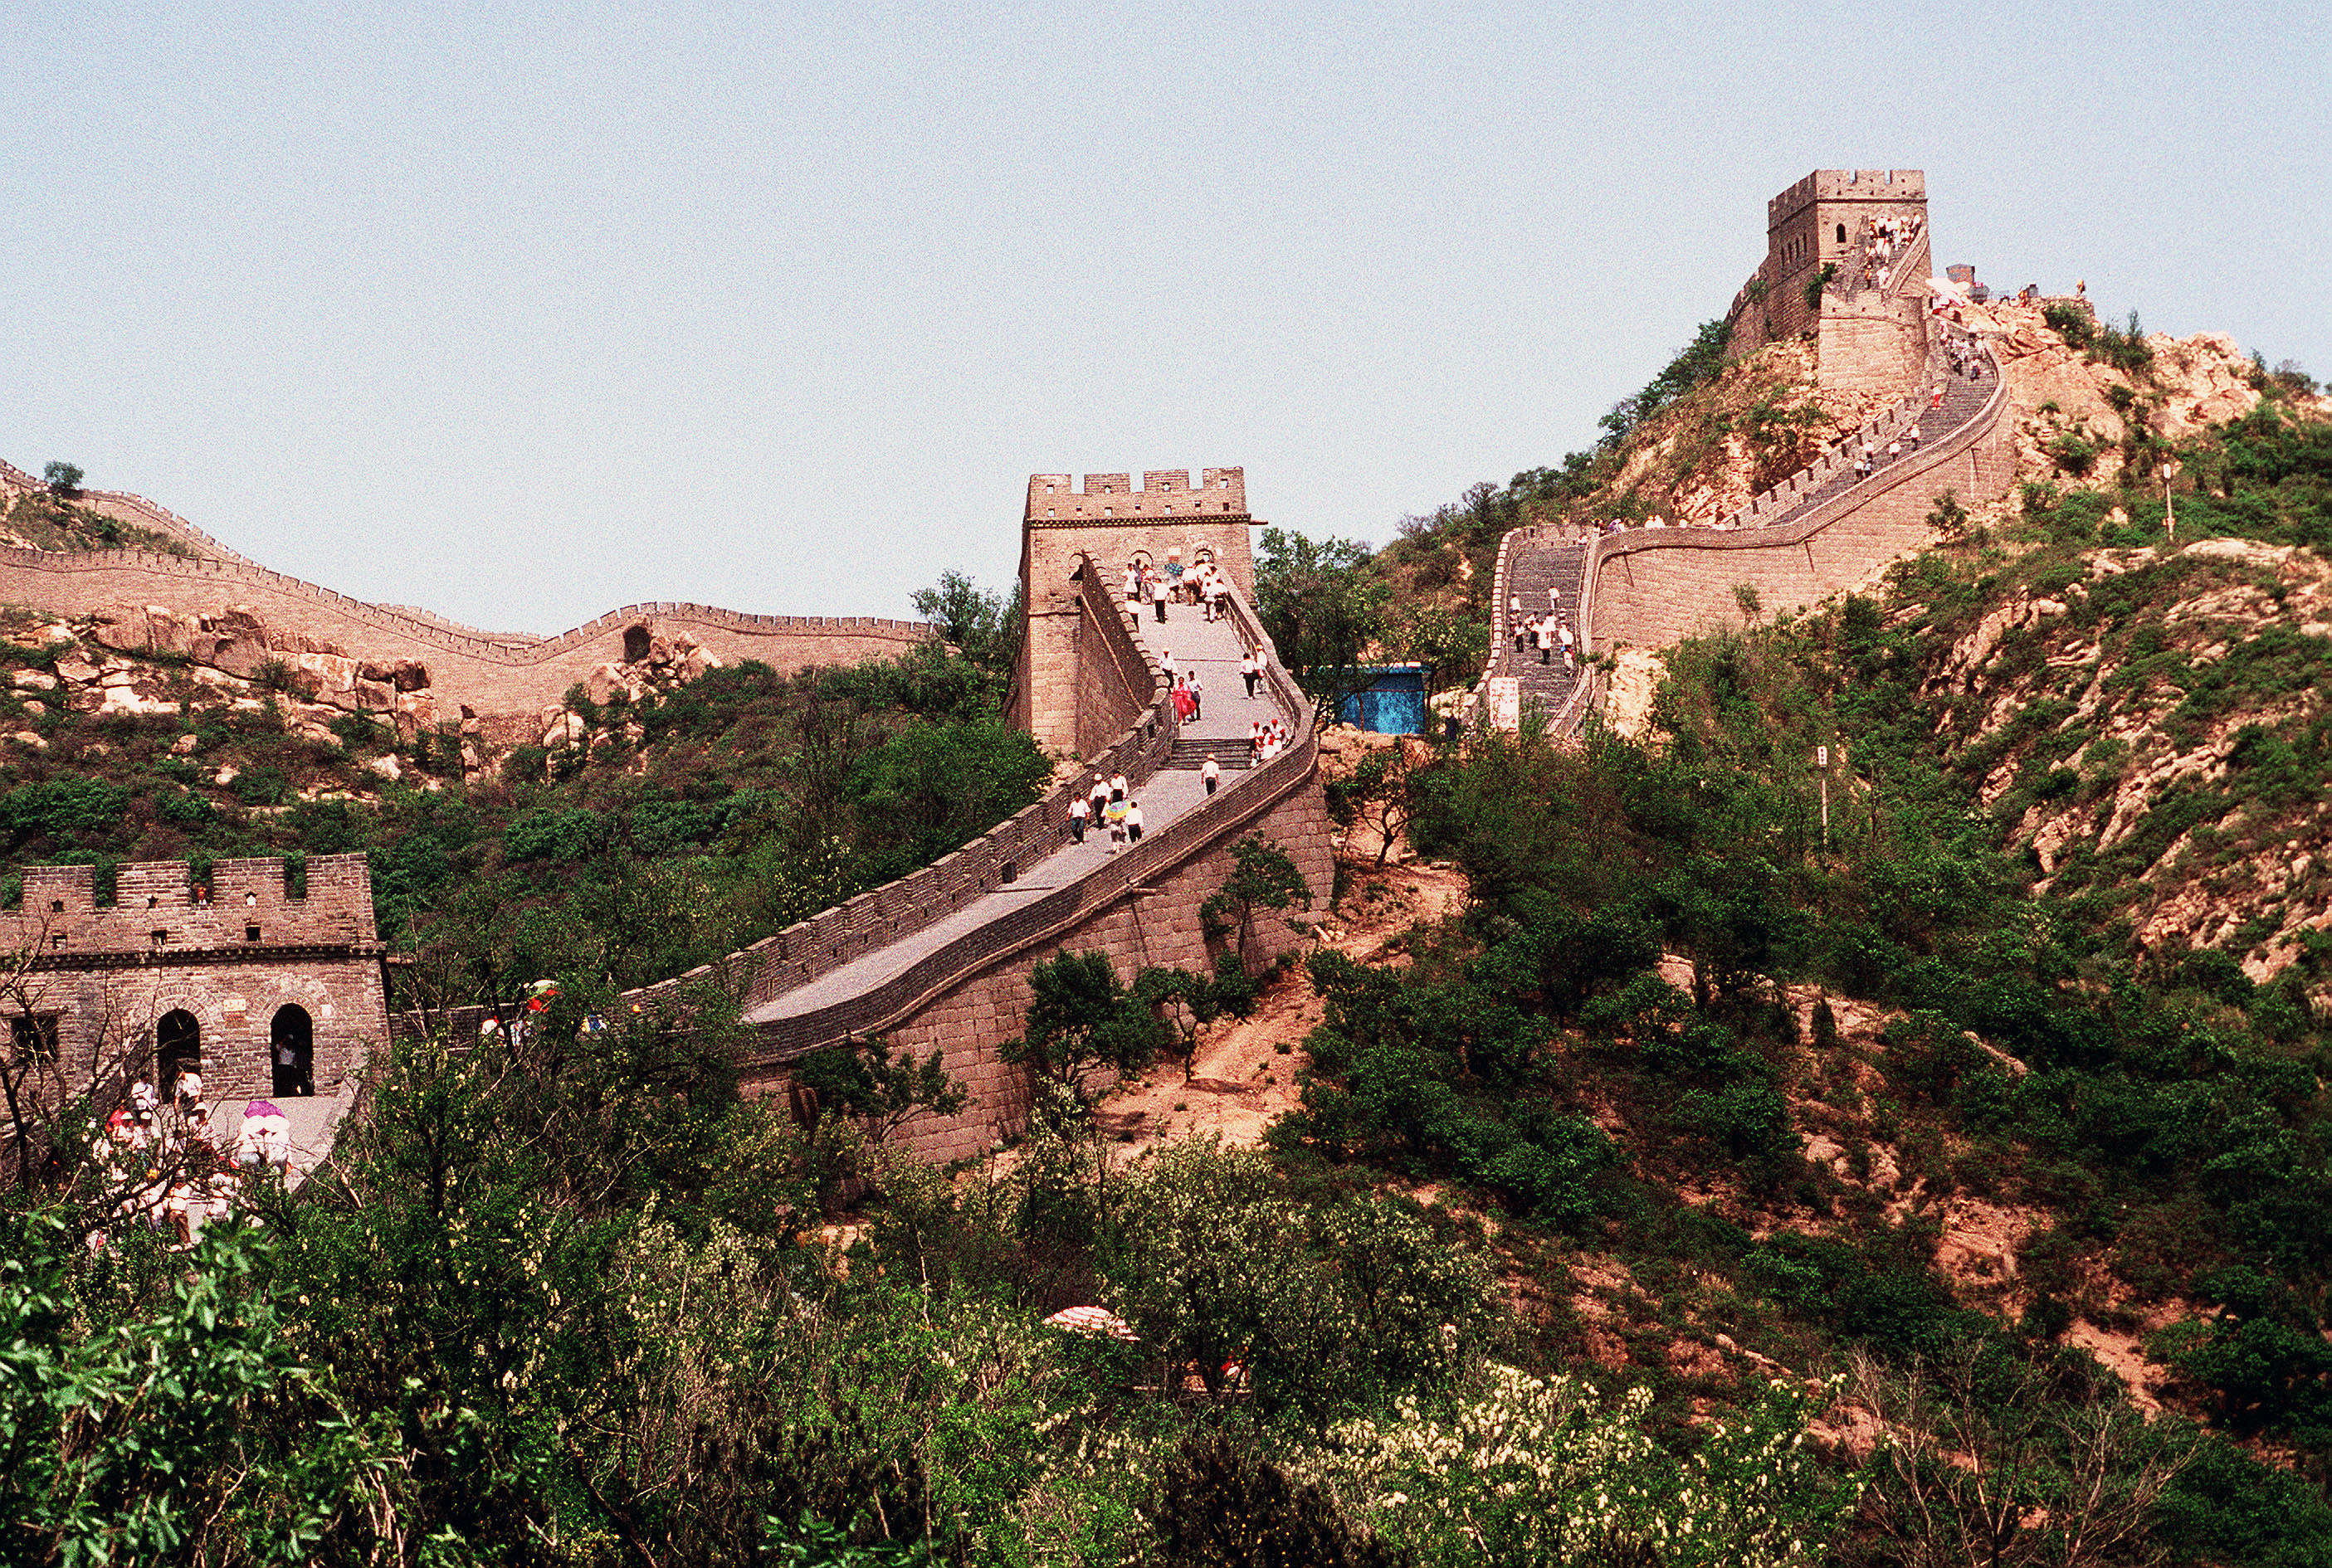 A winding series of steps, walls, and fortifications through a mountain